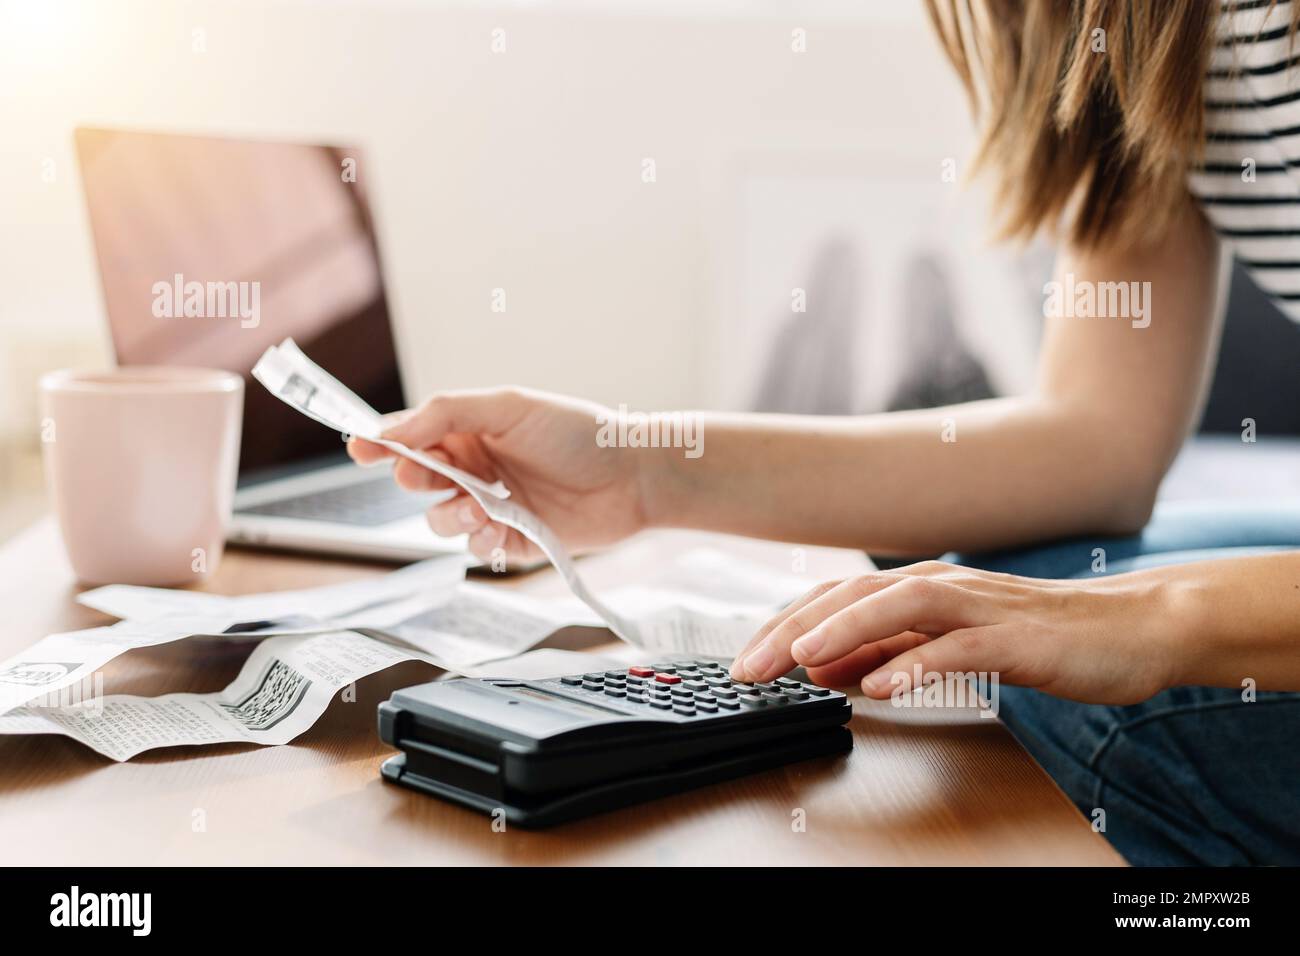 Young woman sitting on sofa using calculator to calculate household expenses Stock Photo